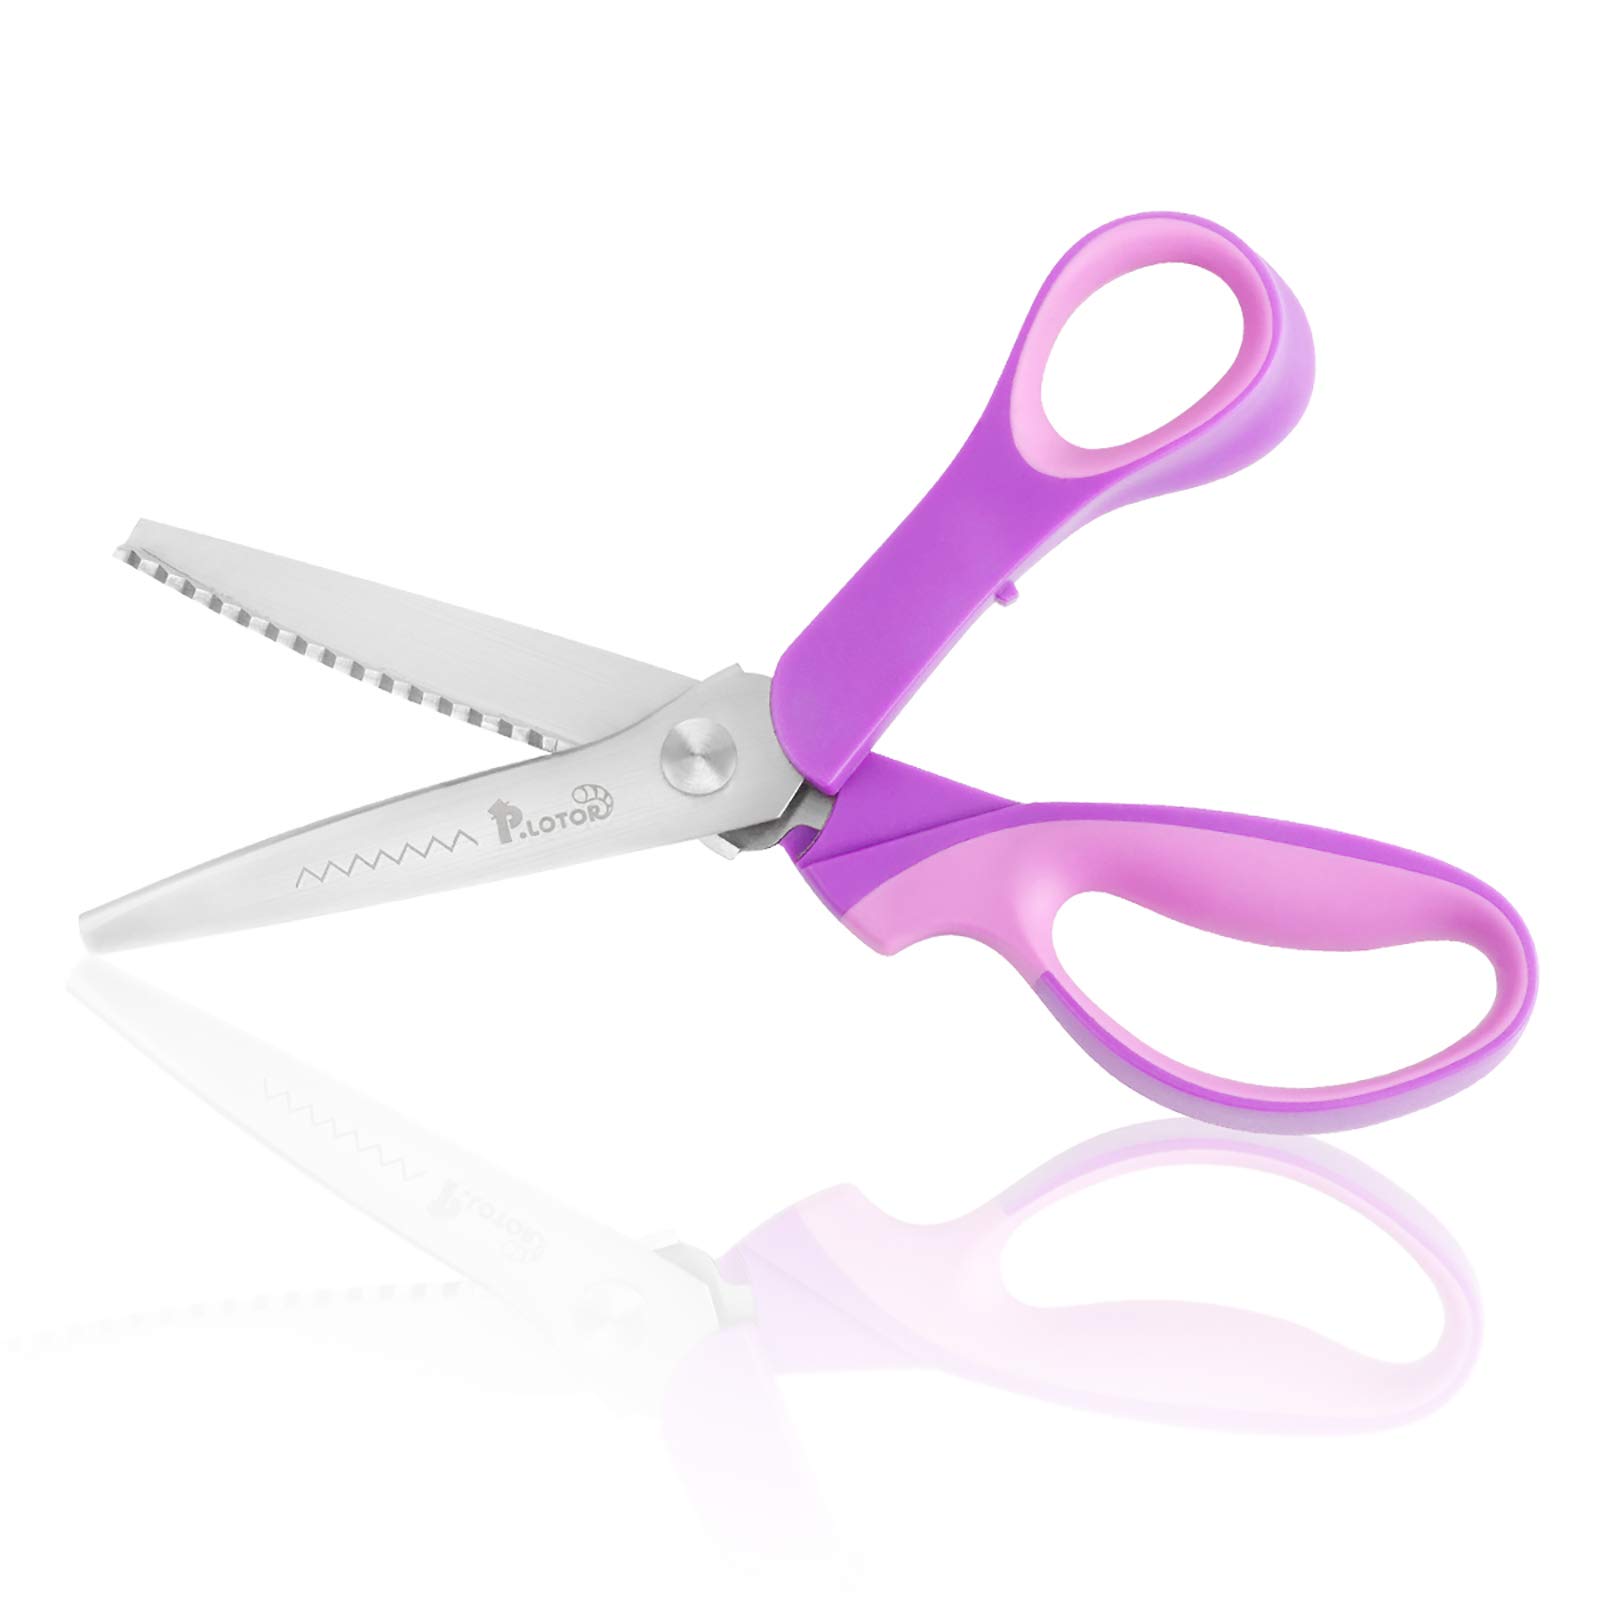 Small Sewing Scissors with Leather Cover Stainless Steel Craft